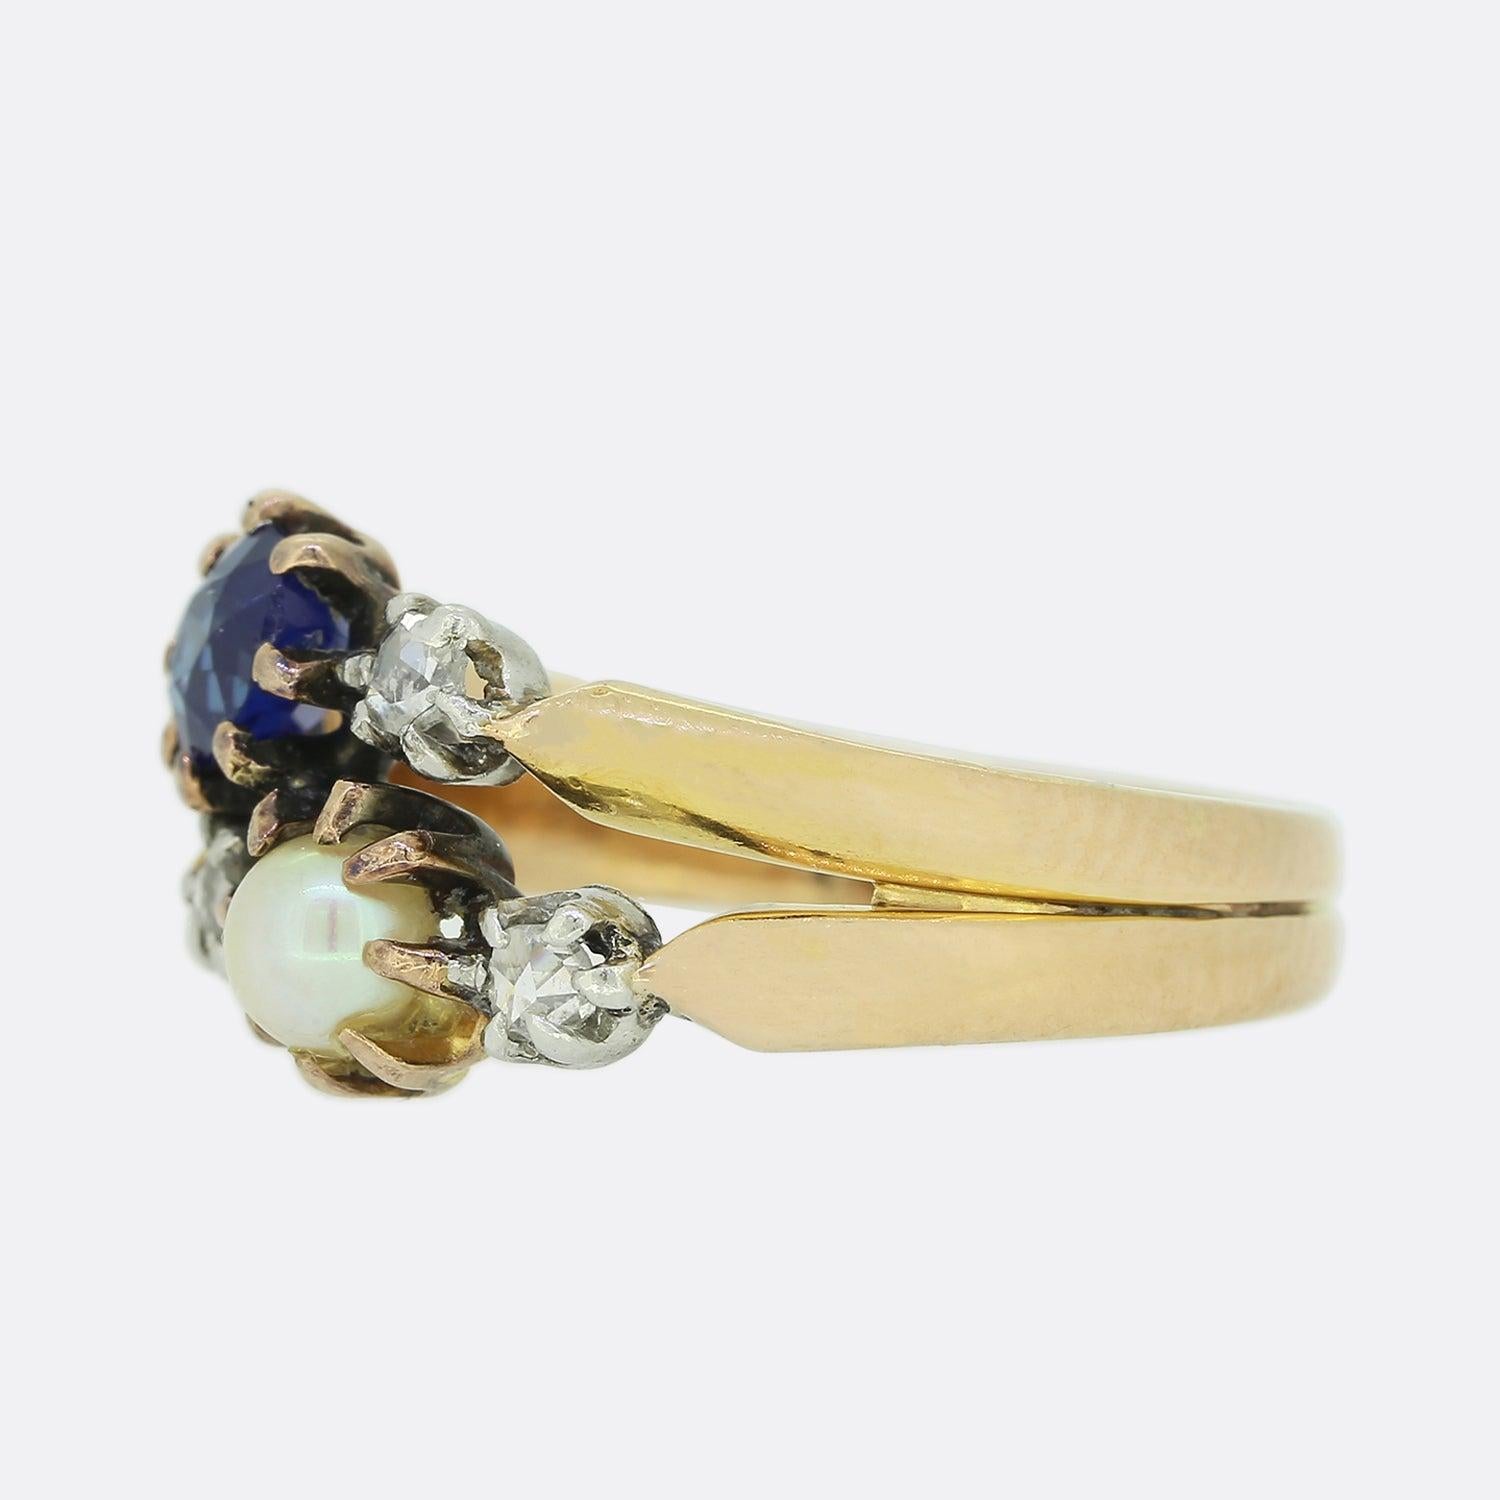 This is a Victorian 15ct yellow gold sapphire, pearl and diamond ring. The ring is crafted in a double banded fashion which graduates inwardly towards the face where we find a single round sapphire and natural pearl; both of which are individually